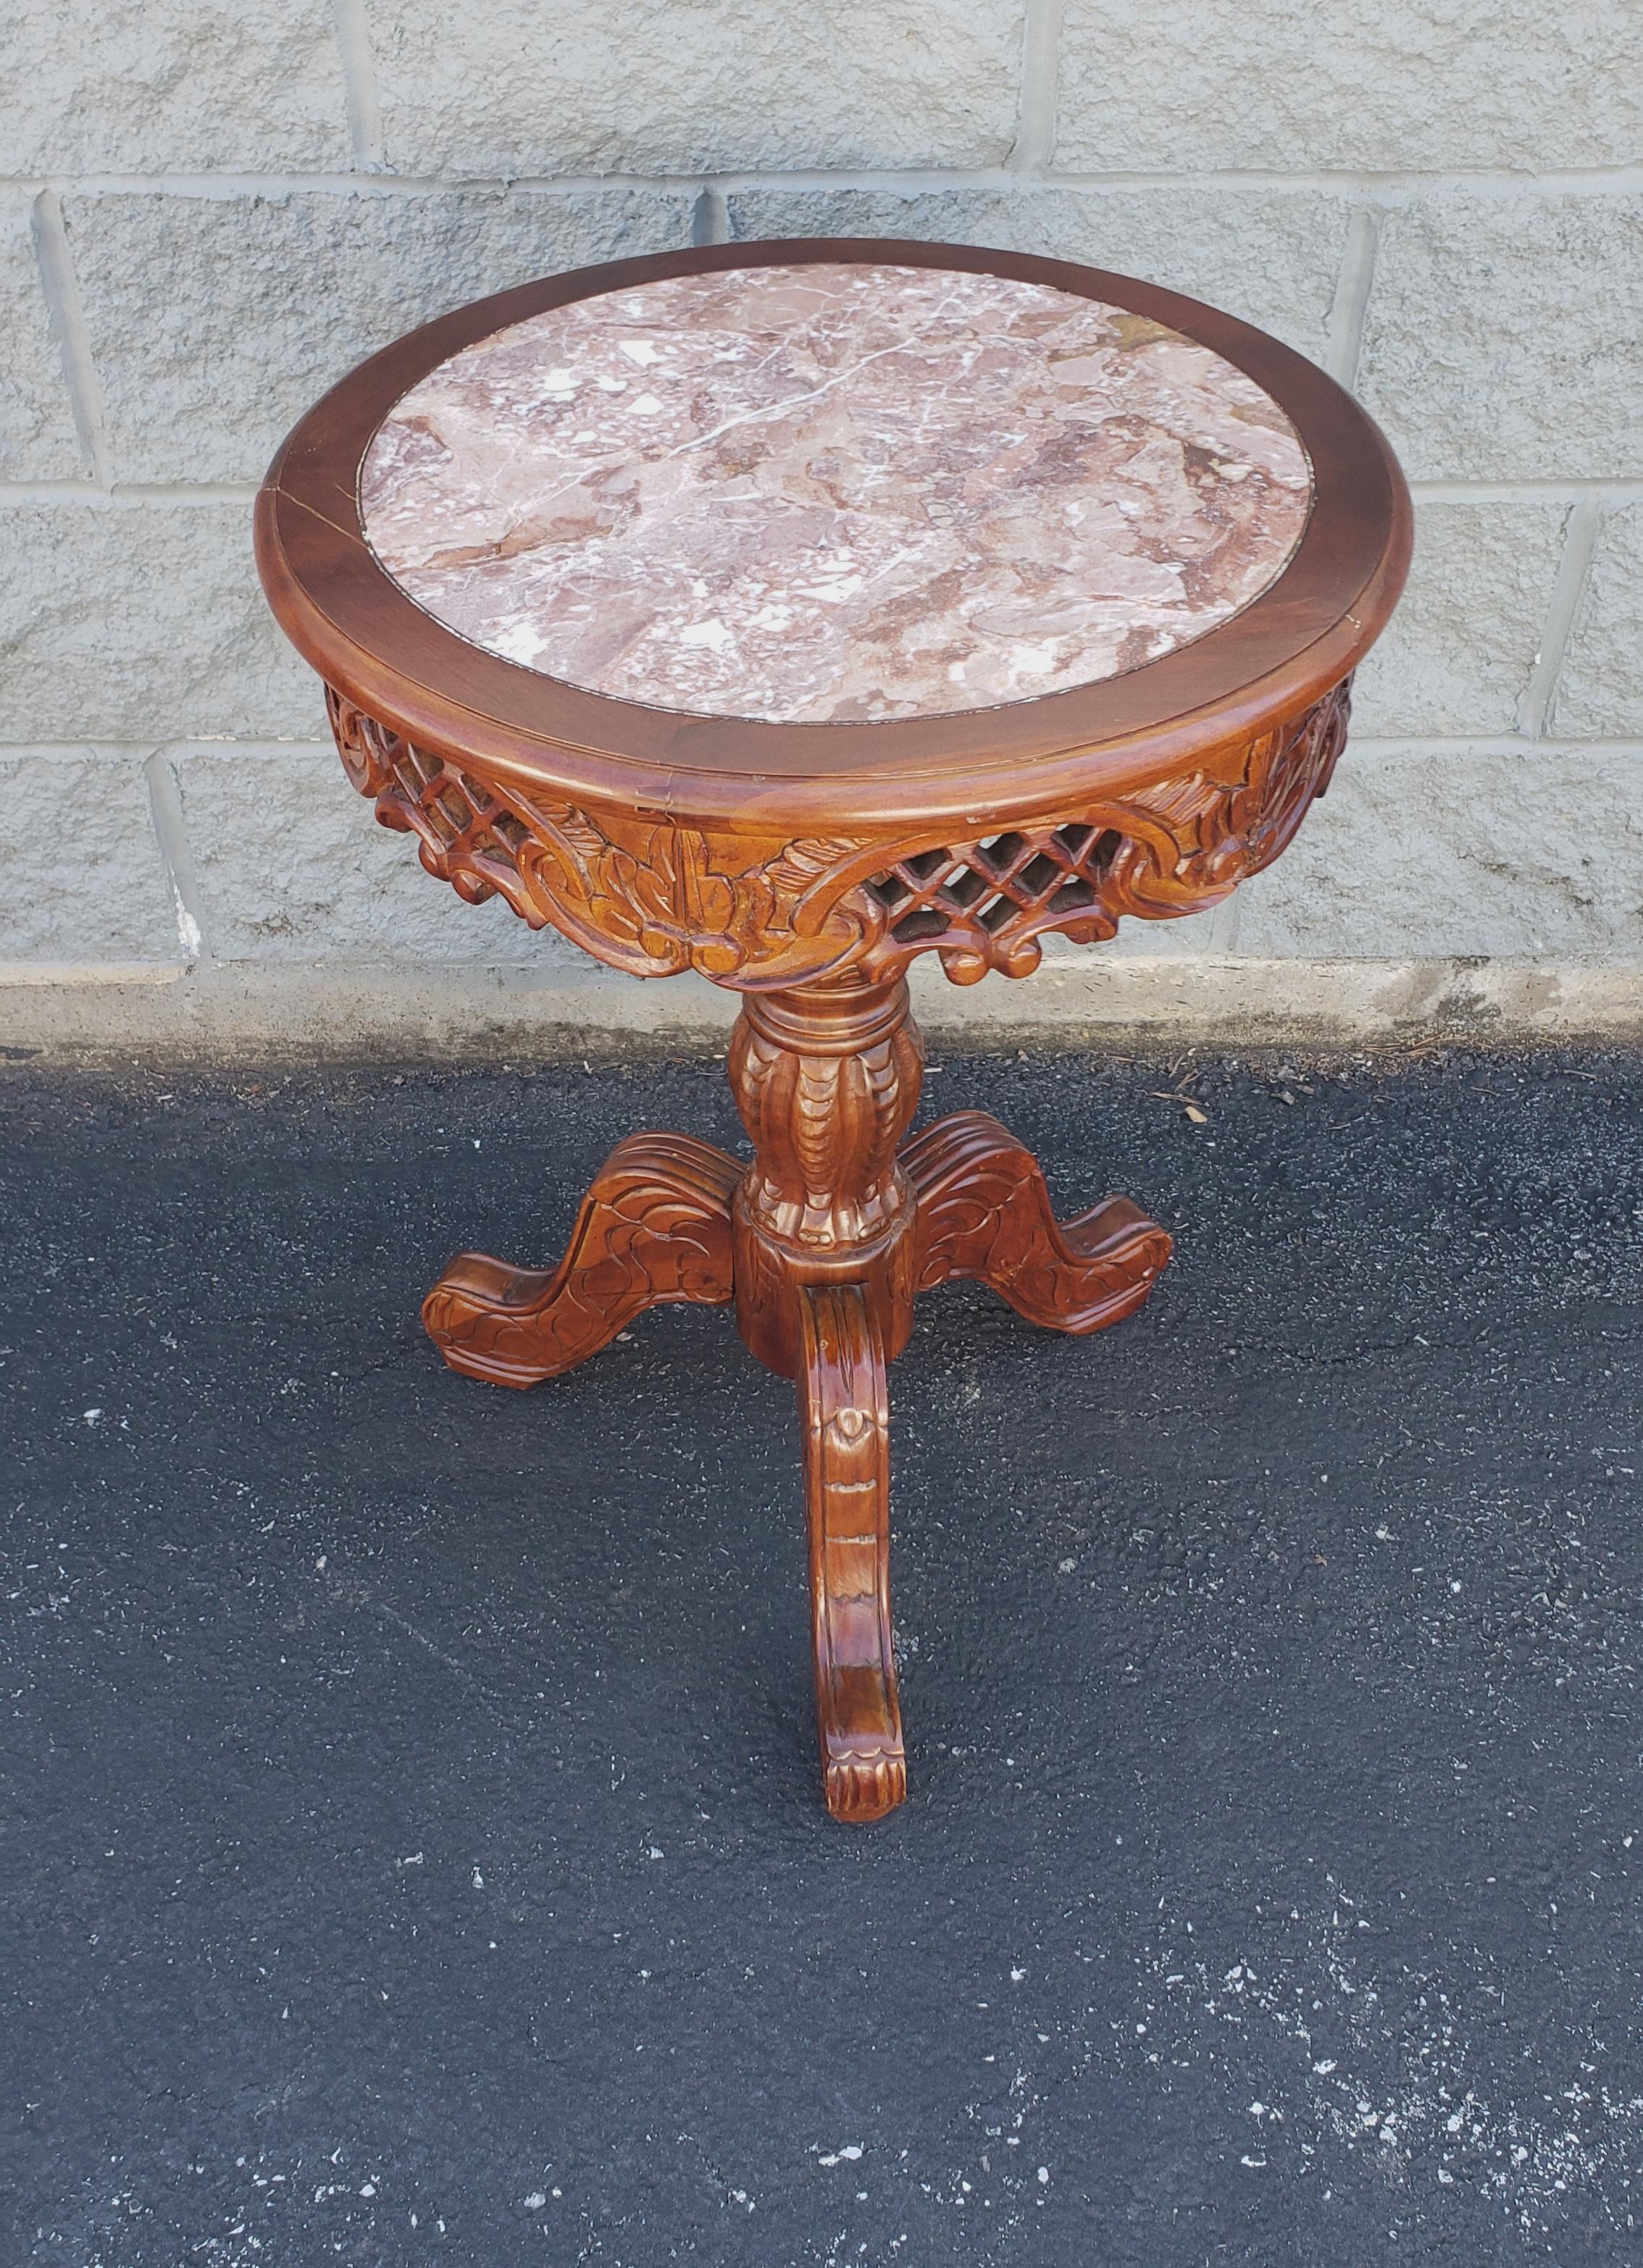 Victorian style carved fruitwood and marble inset pedestal side table measuring 21